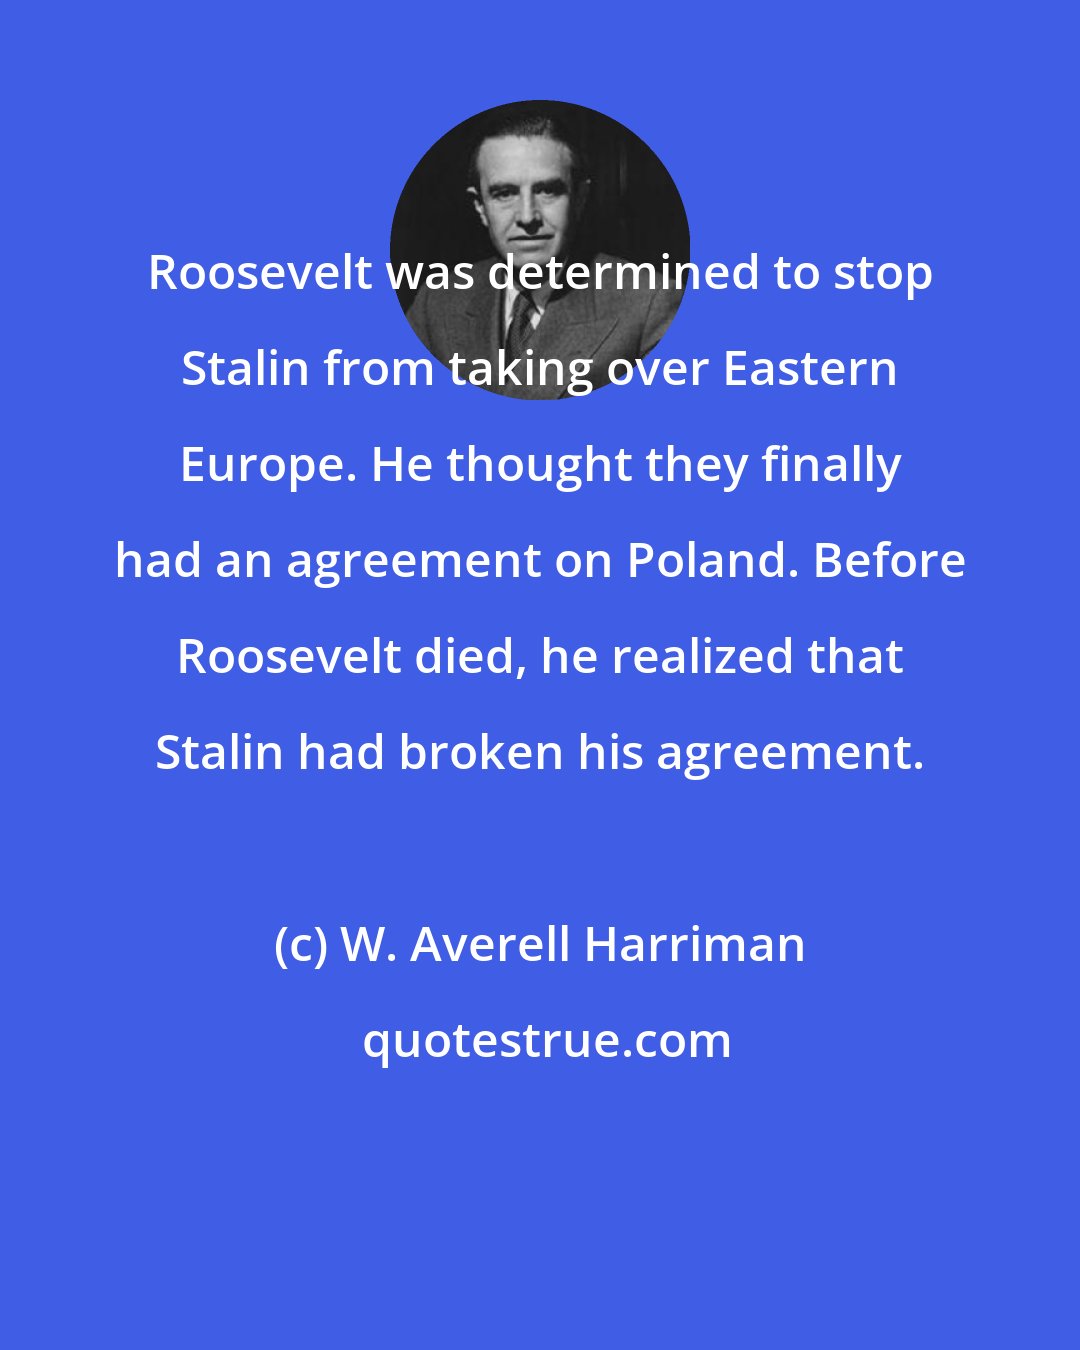 W. Averell Harriman: Roosevelt was determined to stop Stalin from taking over Eastern Europe. He thought they finally had an agreement on Poland. Before Roosevelt died, he realized that Stalin had broken his agreement.